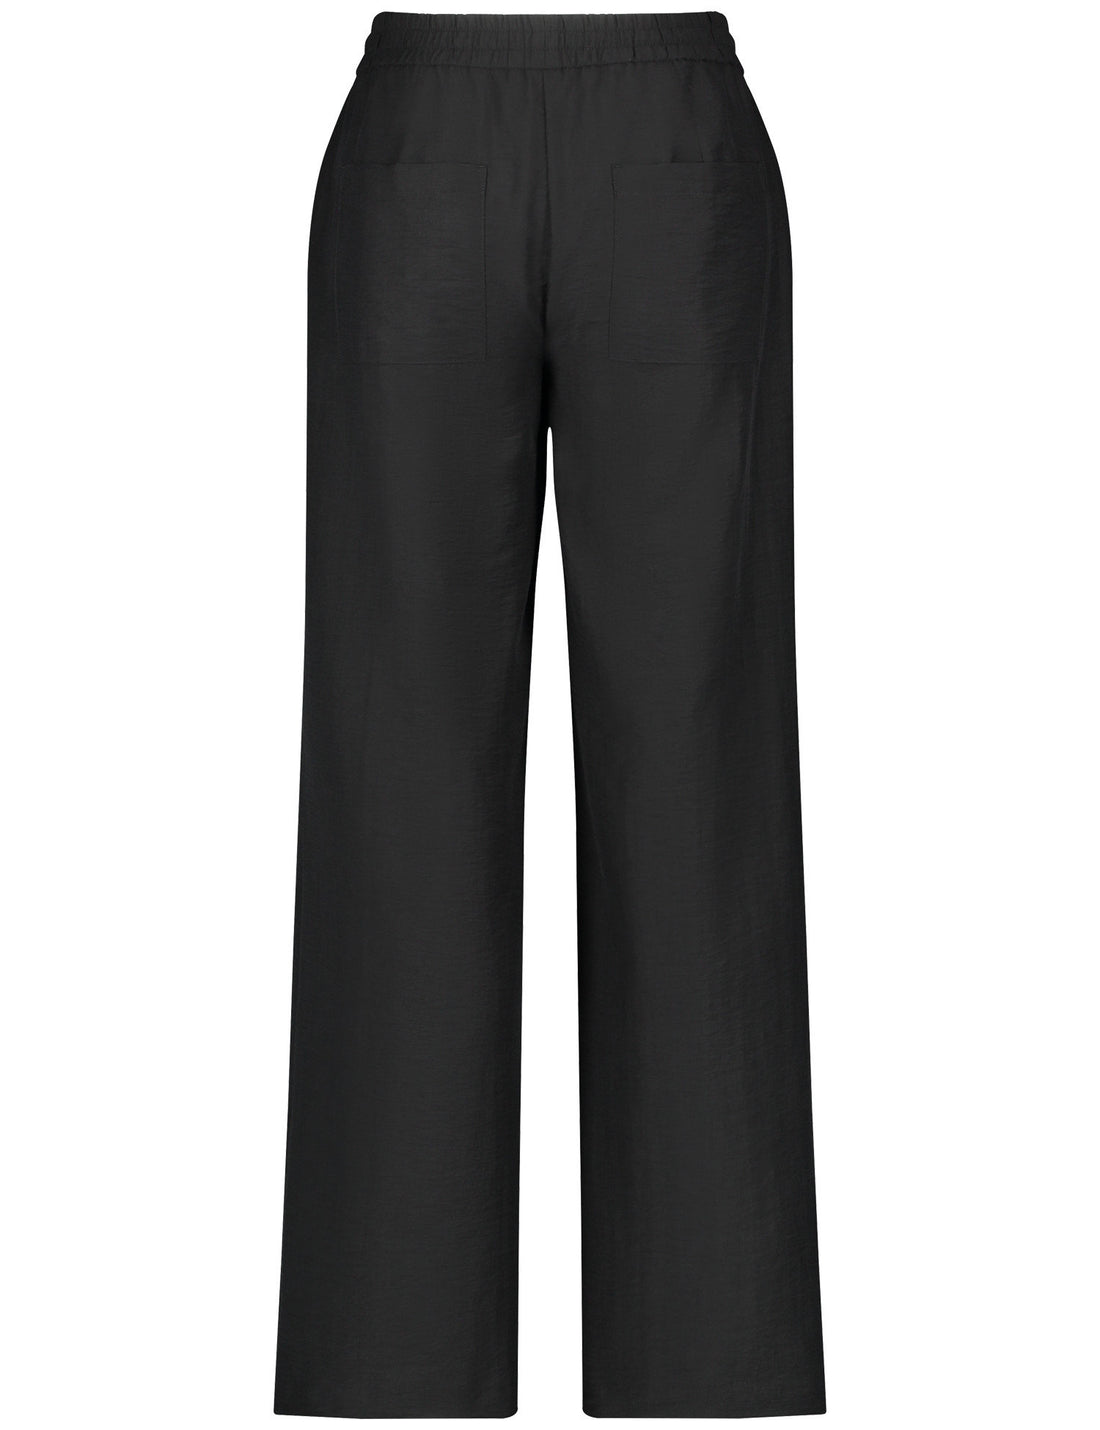 Flowing Trousers With A Stretch Waistband_320047-31354_11000_02